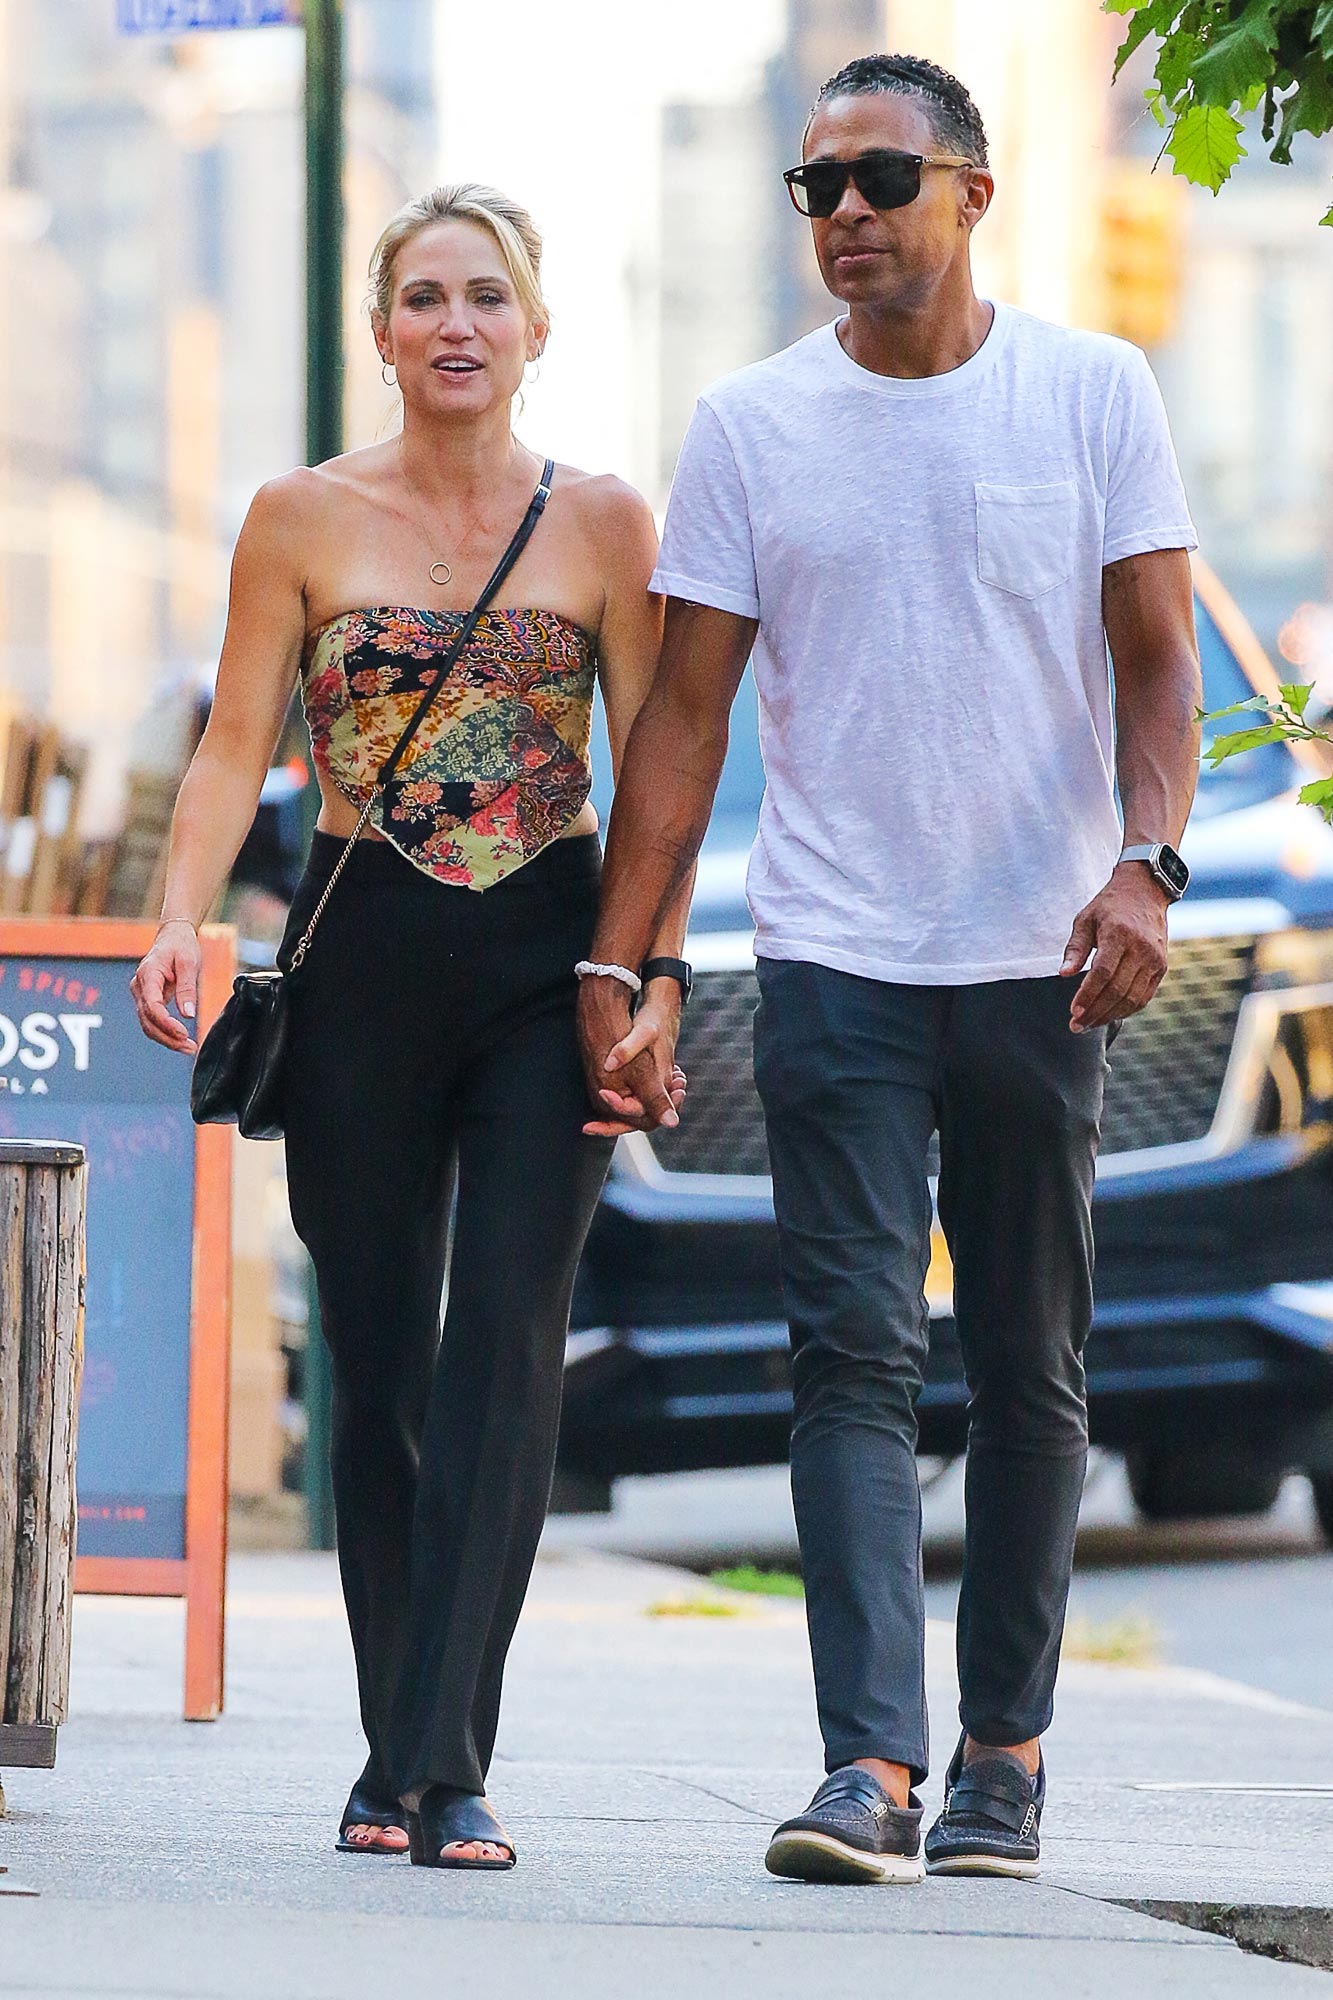 https://www.usmagazine.com/wp-content/uploads/2023/07/Amy-Robach-and-T.J.-Holmes-Hold-Hands-During-Bar-Hopping-Date-Night-in-New-York-City-321.jpg?quality=86&strip=all